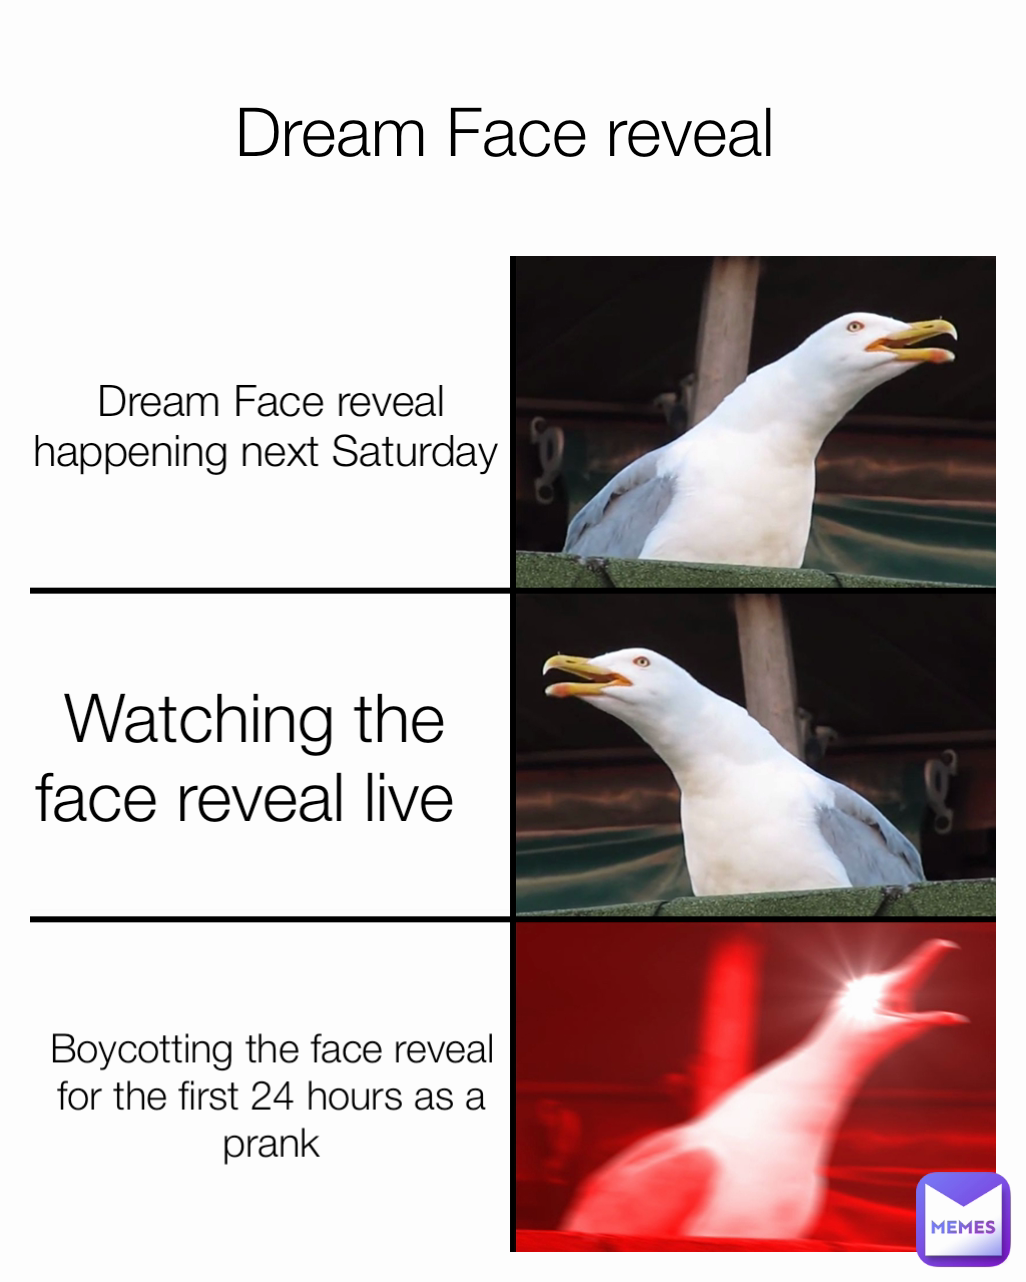 Boycotting the face reveal for the first 24 hours as a prank Watching the face reveal live  Dream Face reveal happening next Saturday  Dream Face reveal 